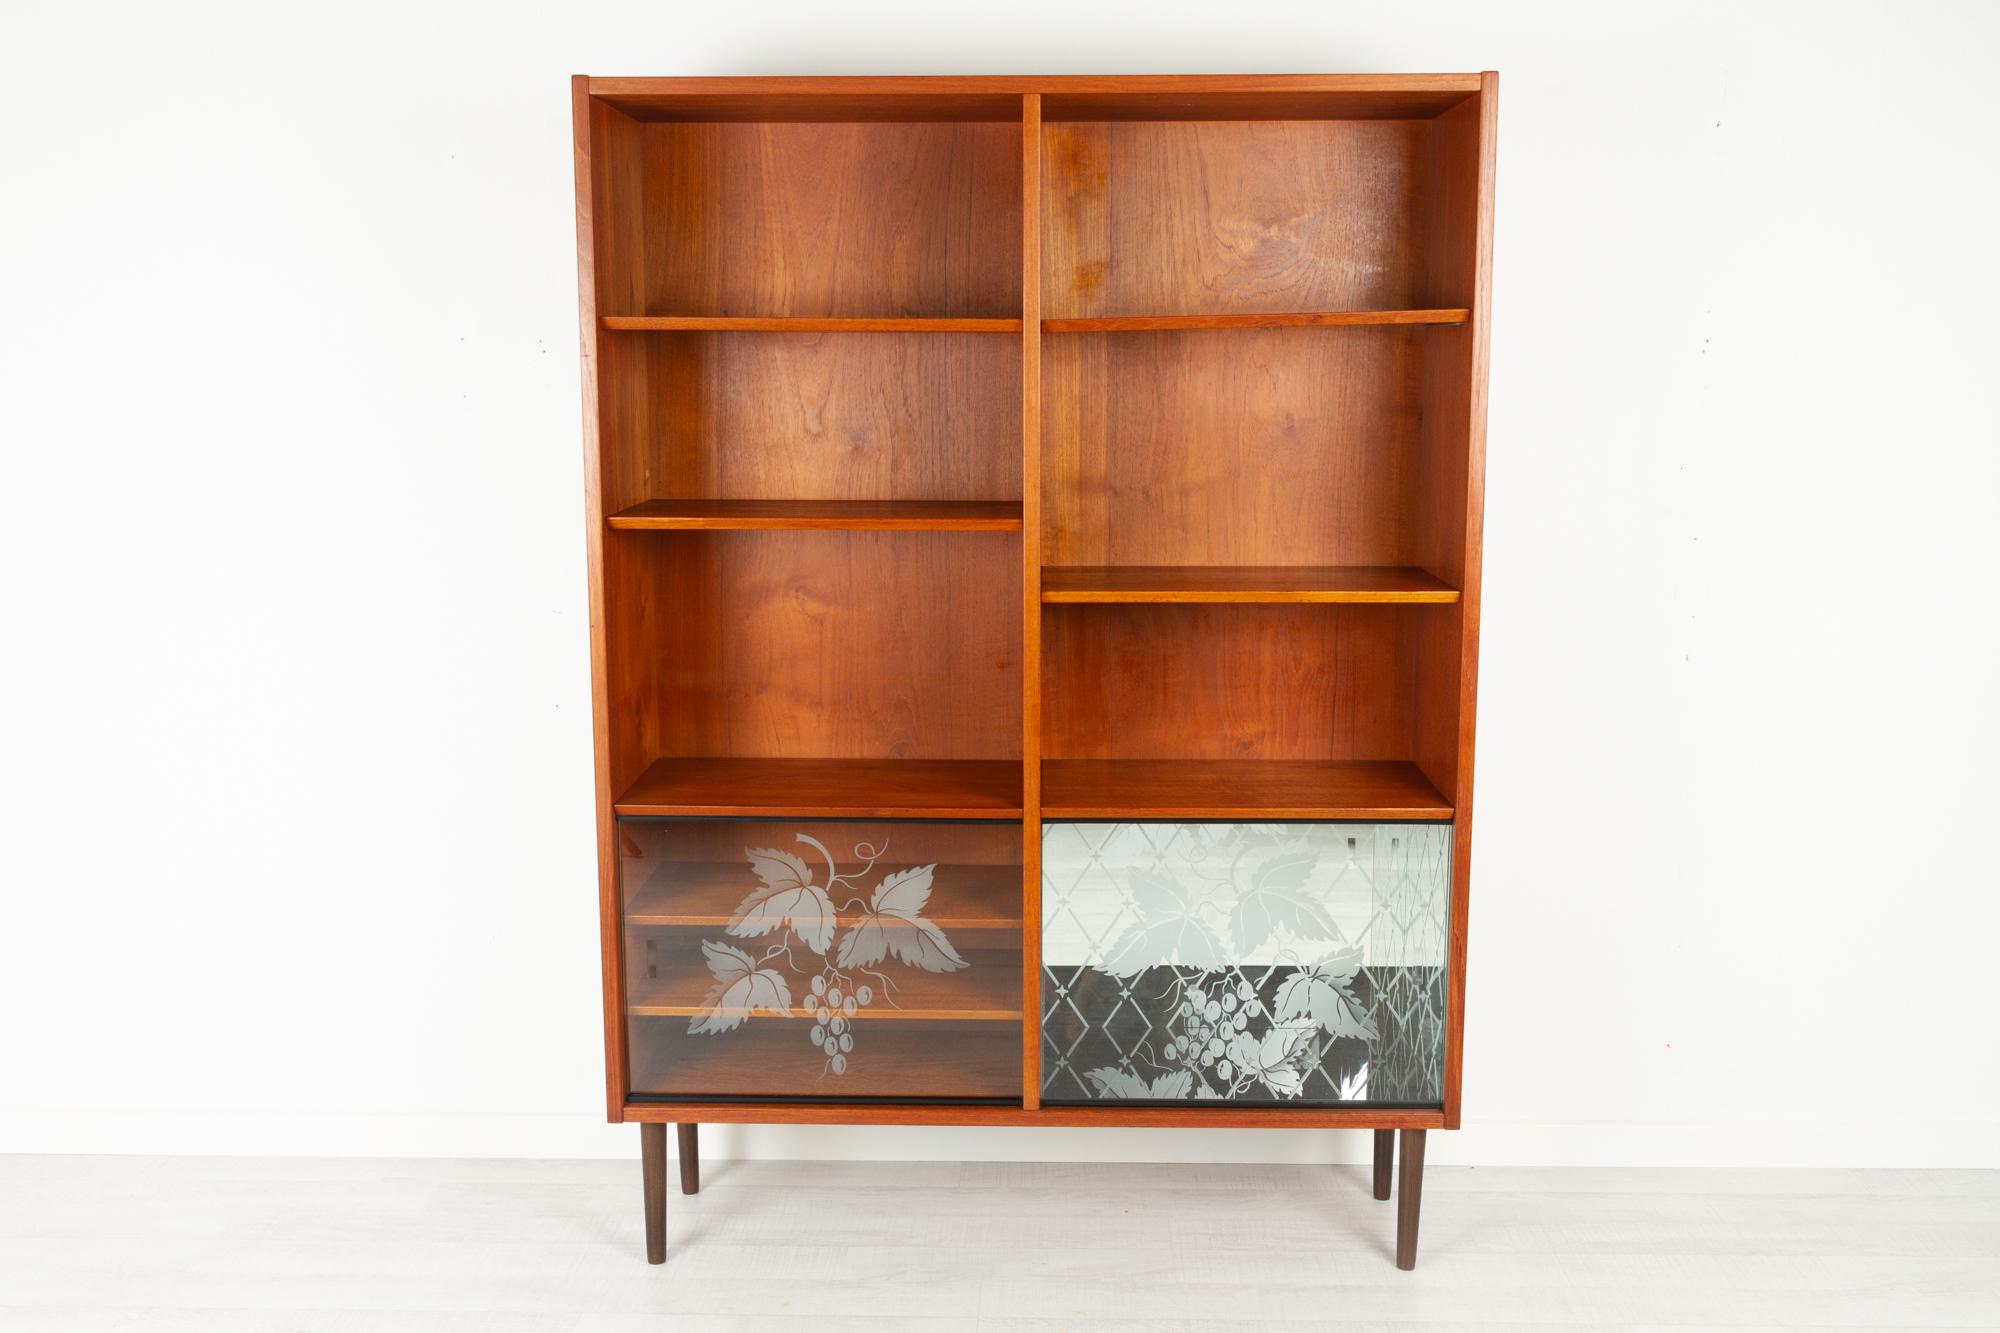 Vintage Danish teak bookcase by Hundevad & Co 1960s
Mid-Century Modern bookcase with mirrored dry bar unit and sliding glass doors. Glass doors has etched floral motifs. Six height adjustable shelves with slanted edge. Round tapered legs in solid